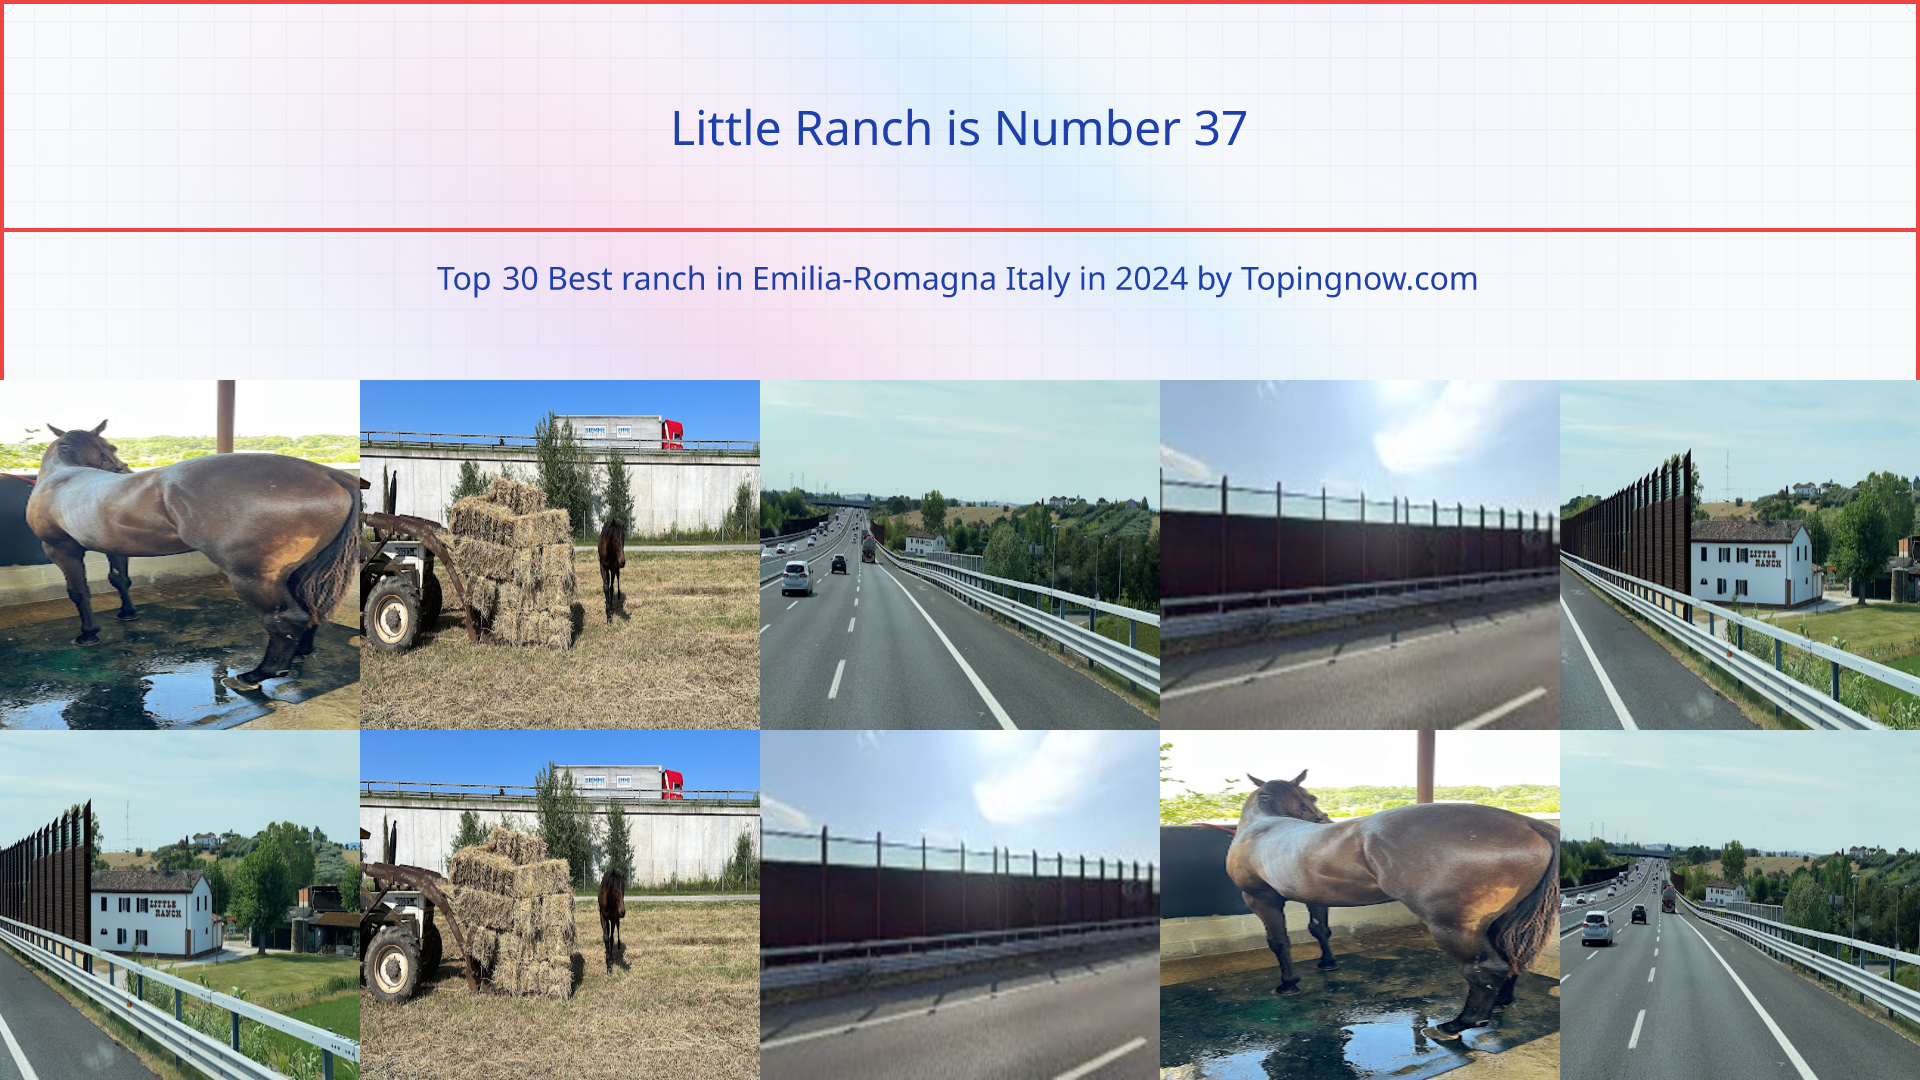 Little Ranch: Top 30 Best ranch in Emilia-Romagna Italy in 2024